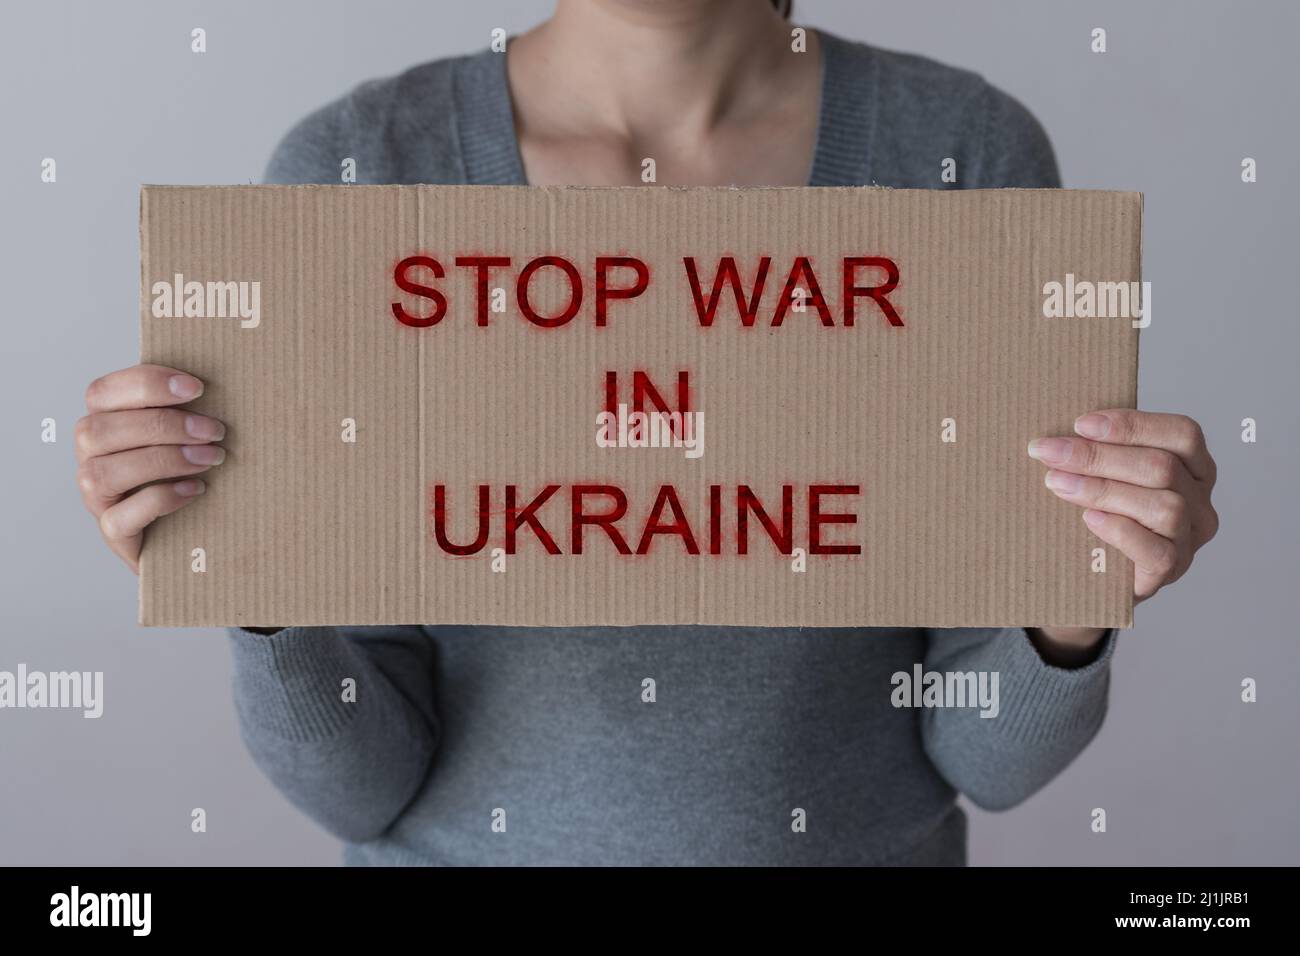 A woman holds paper placard with sign 'STOP WAR IN UKRAINE' Stock Photo